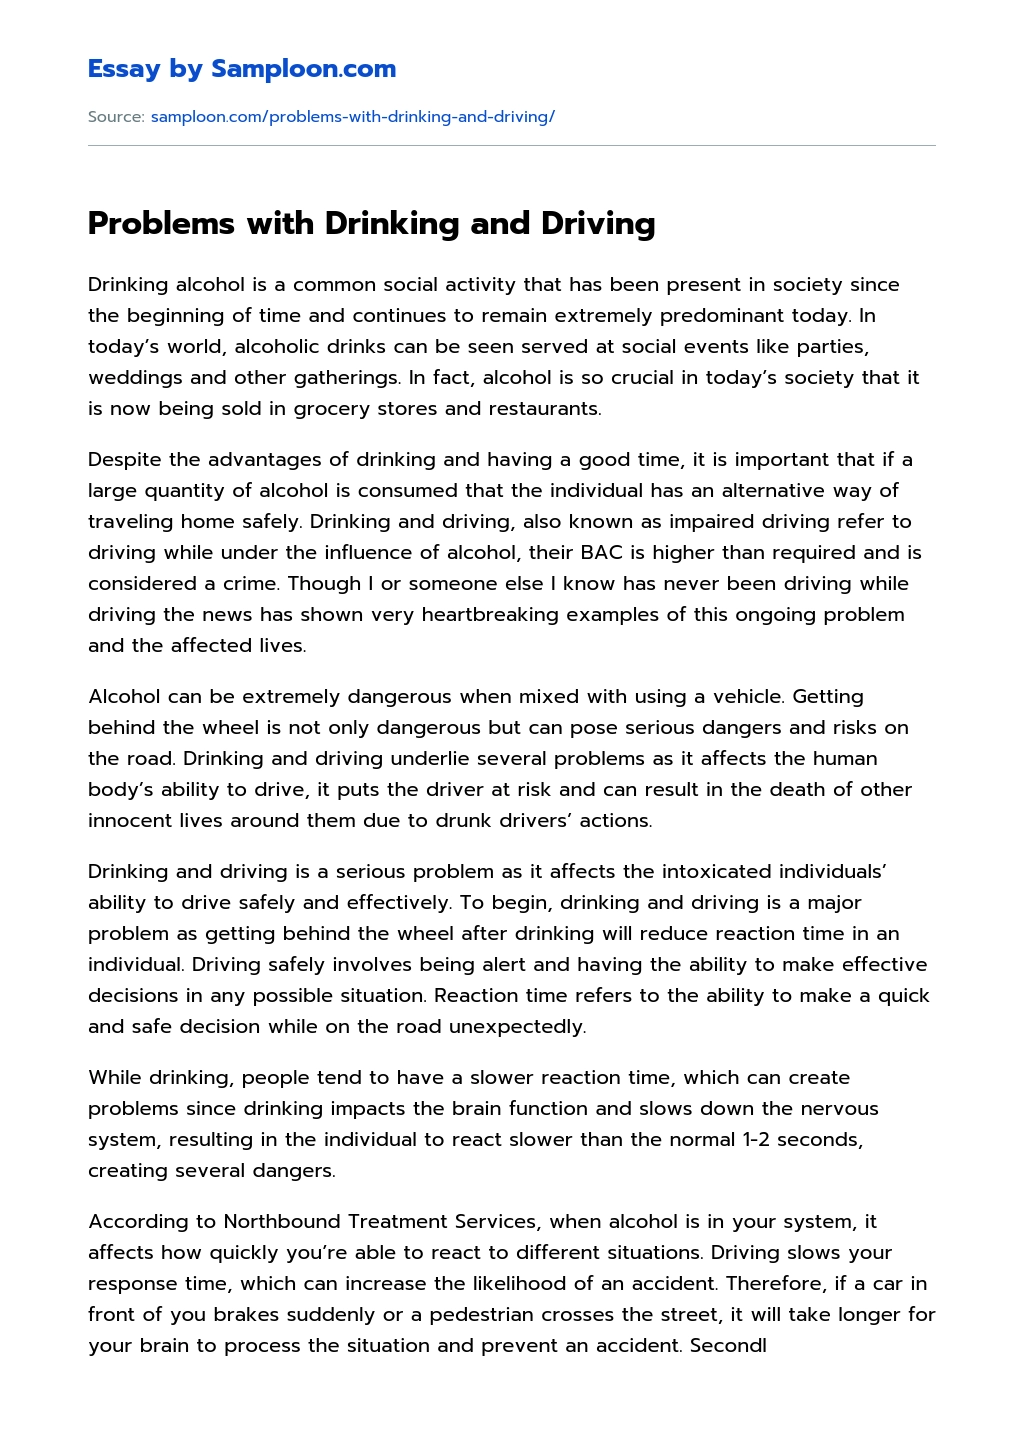 Problems with Drinking and Driving Research Paper essay